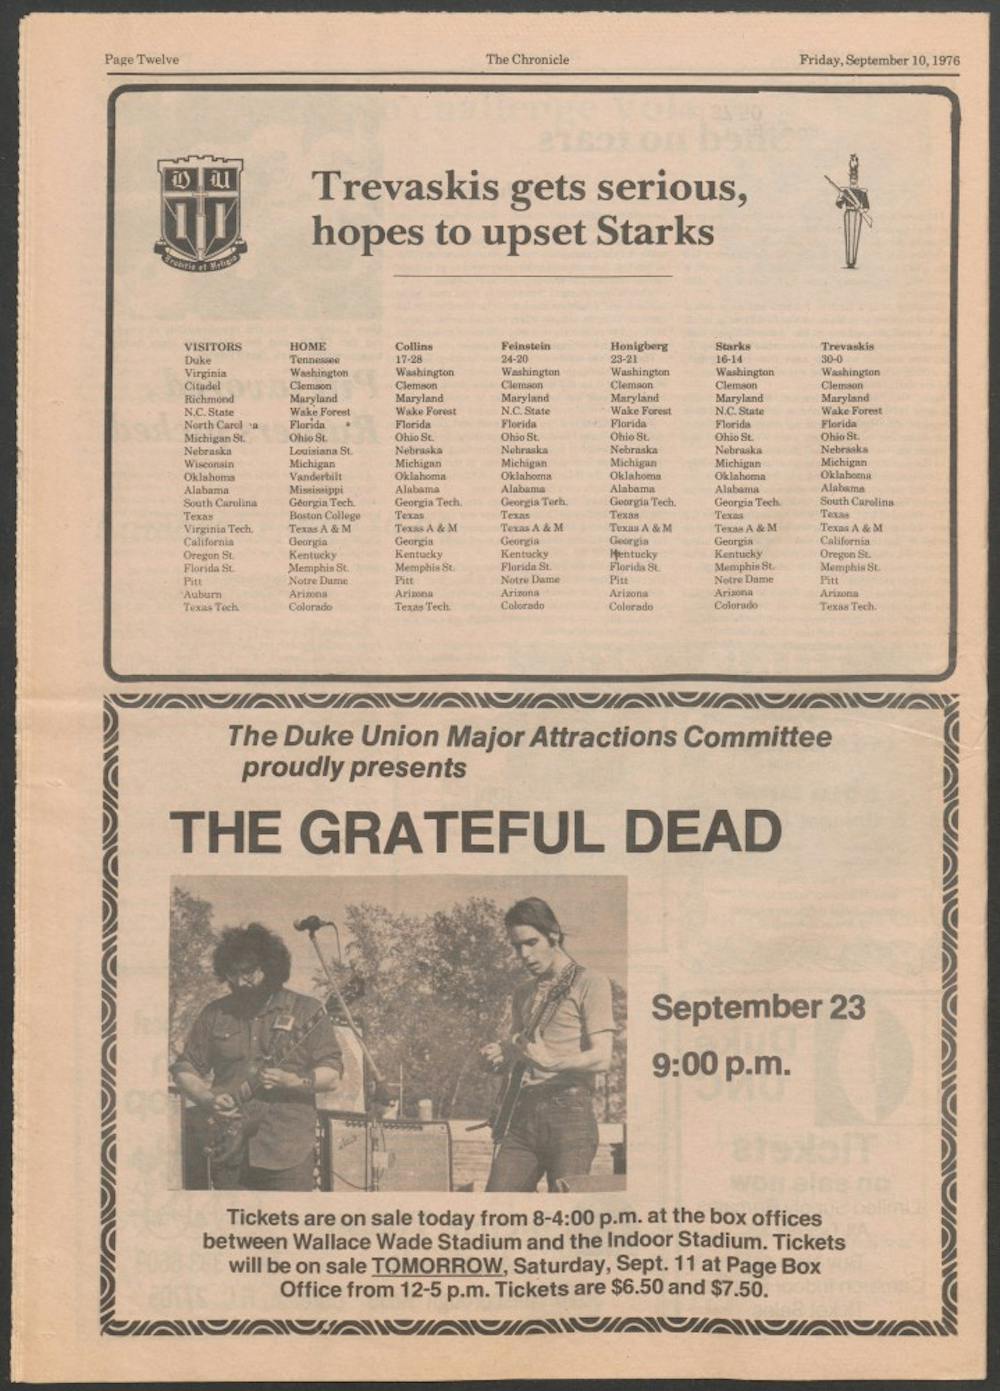 Years before Mike Krzyzewski ever coached a game in Cameron Indoor Stadium, the Grateful Dead had a concert there in 1977.